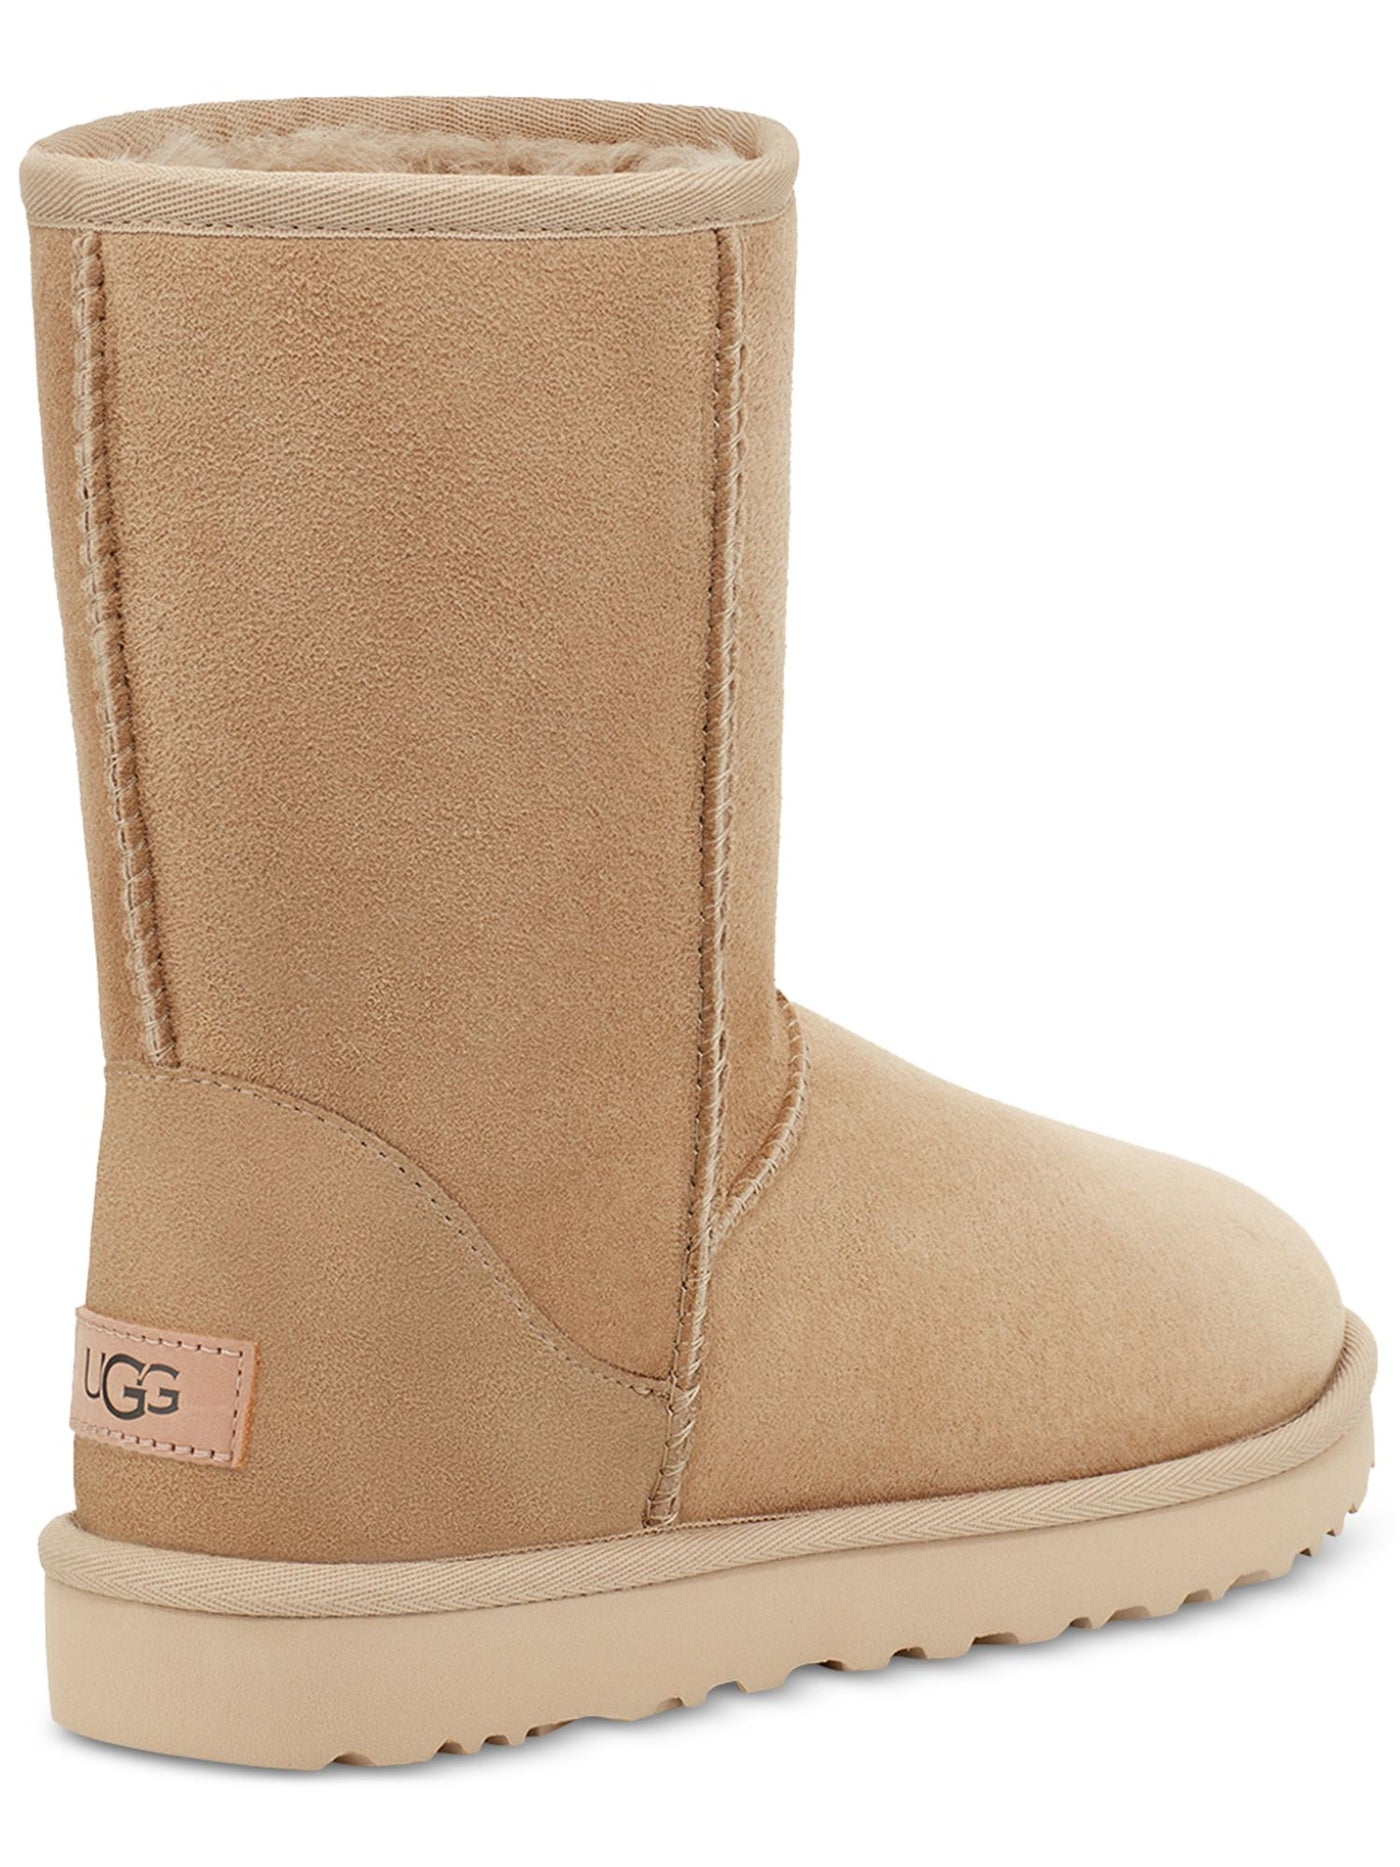 UGG Womens Beige Cushioned Classic Short Ii Round Toe Leather Winter Boots 9